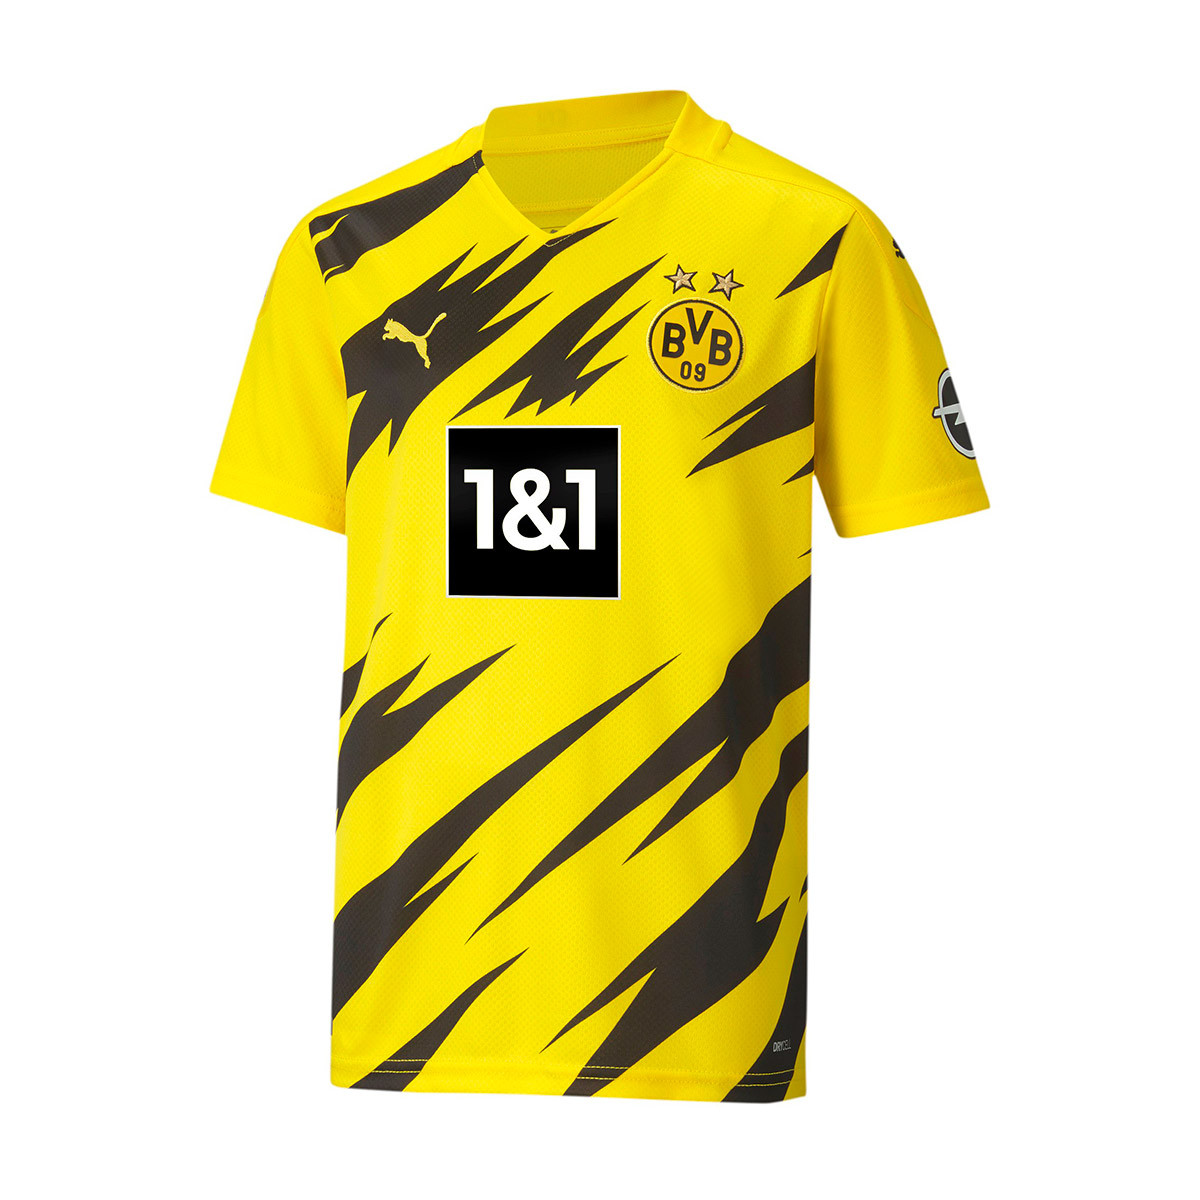 puma design your own jersey